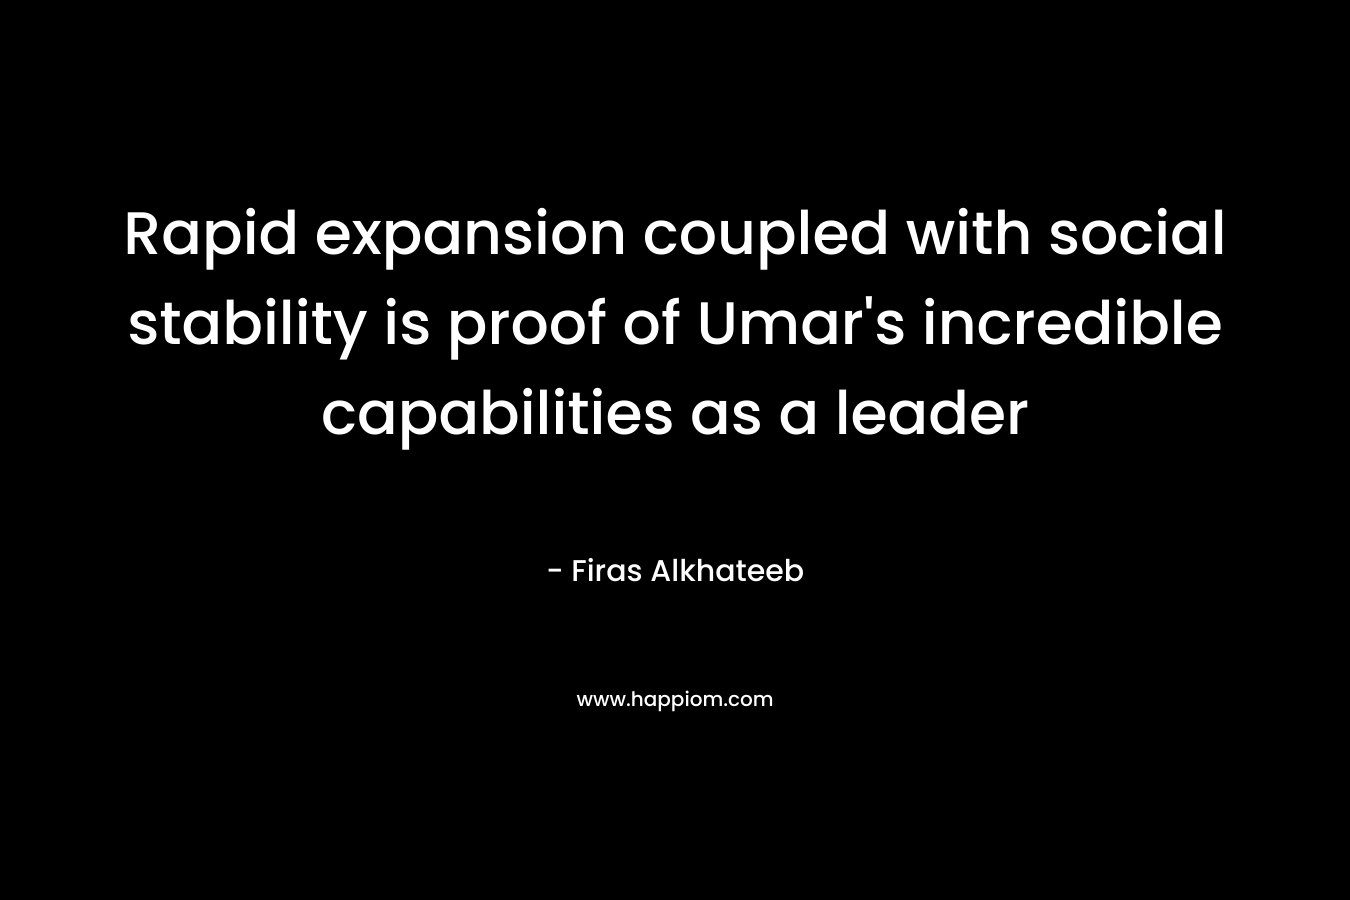 Rapid expansion coupled with social stability is proof of Umar's incredible capabilities as a leader